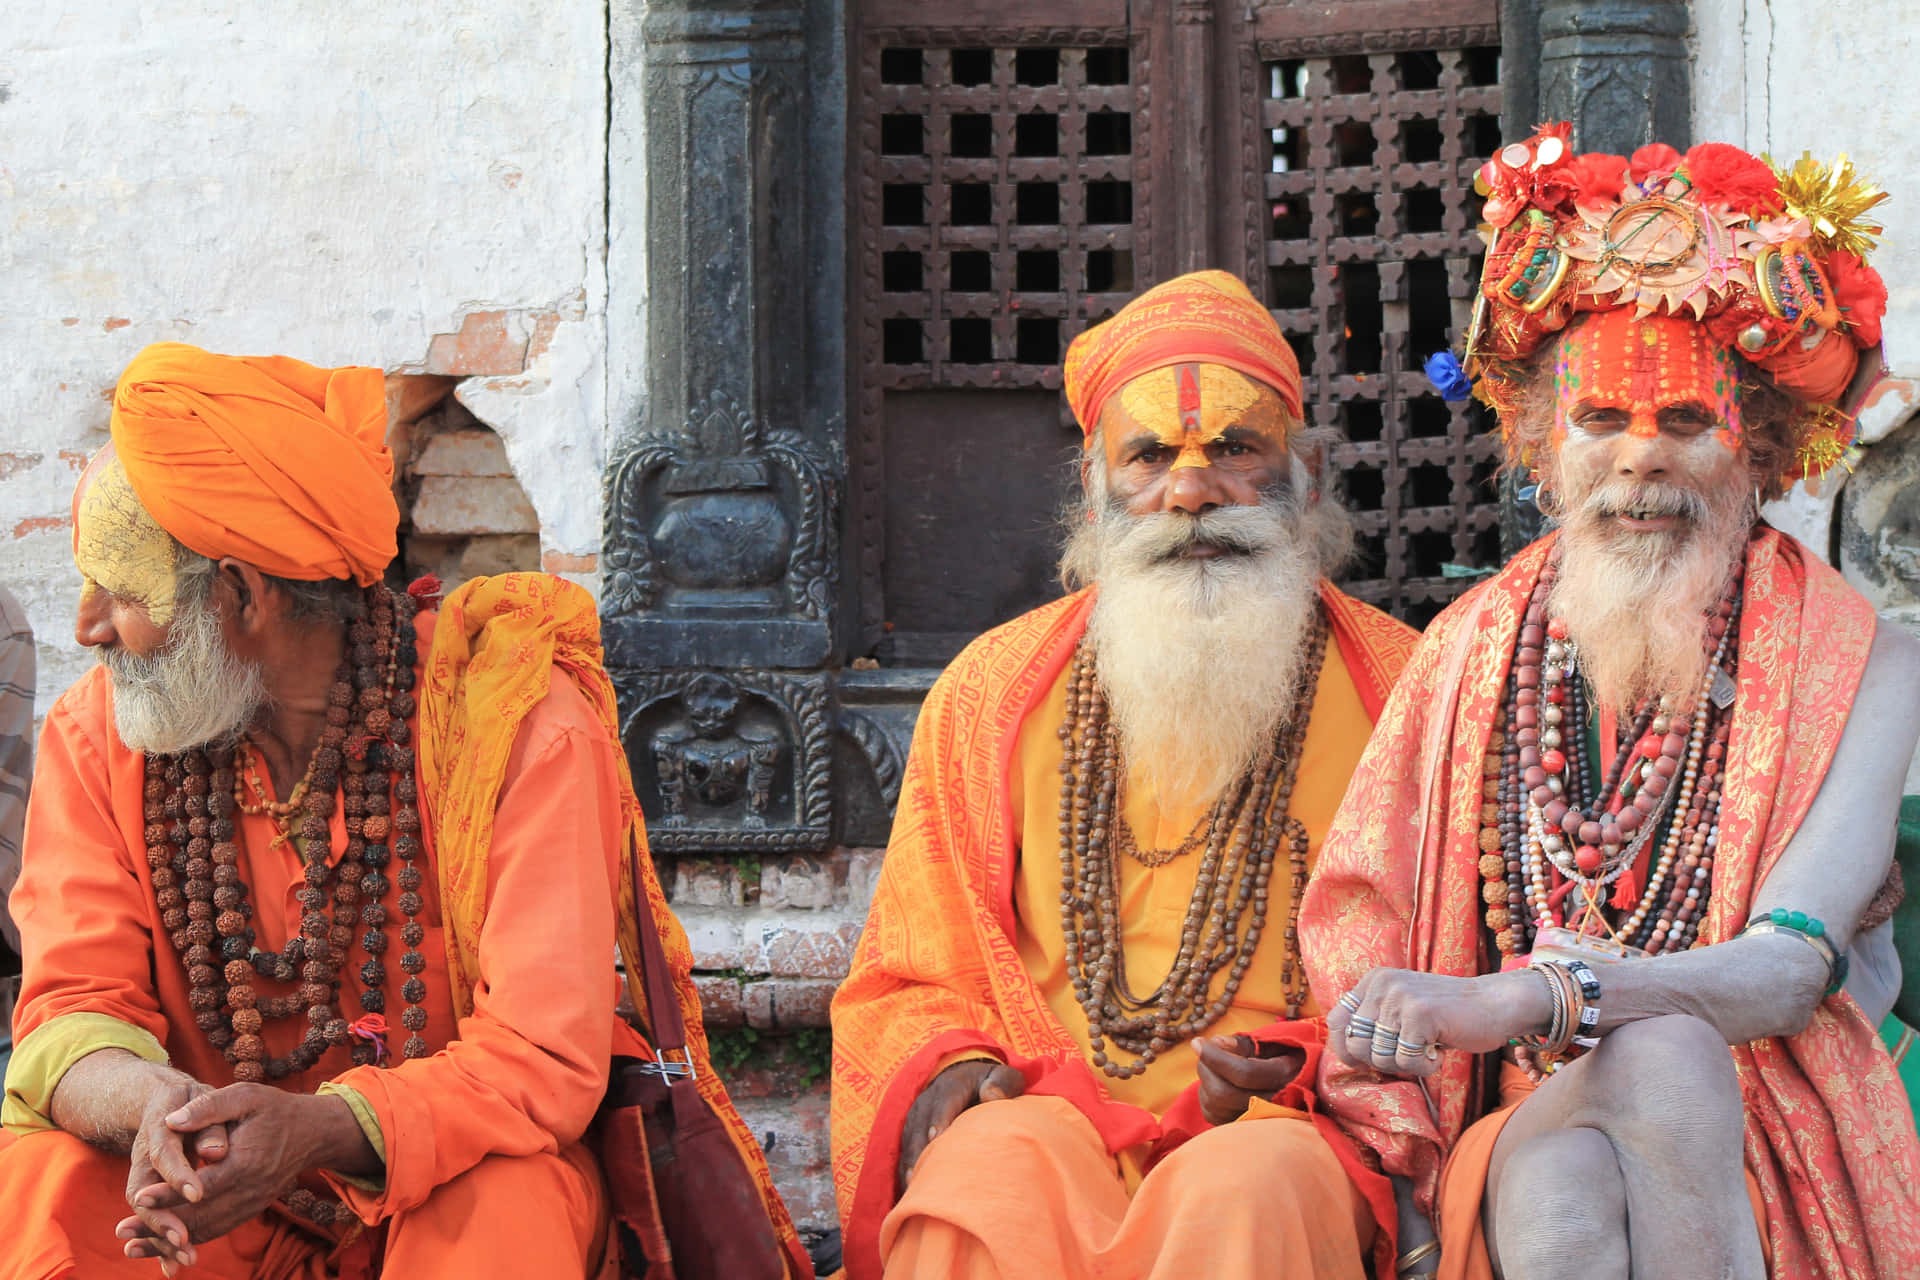 India's vibrant culture and cities